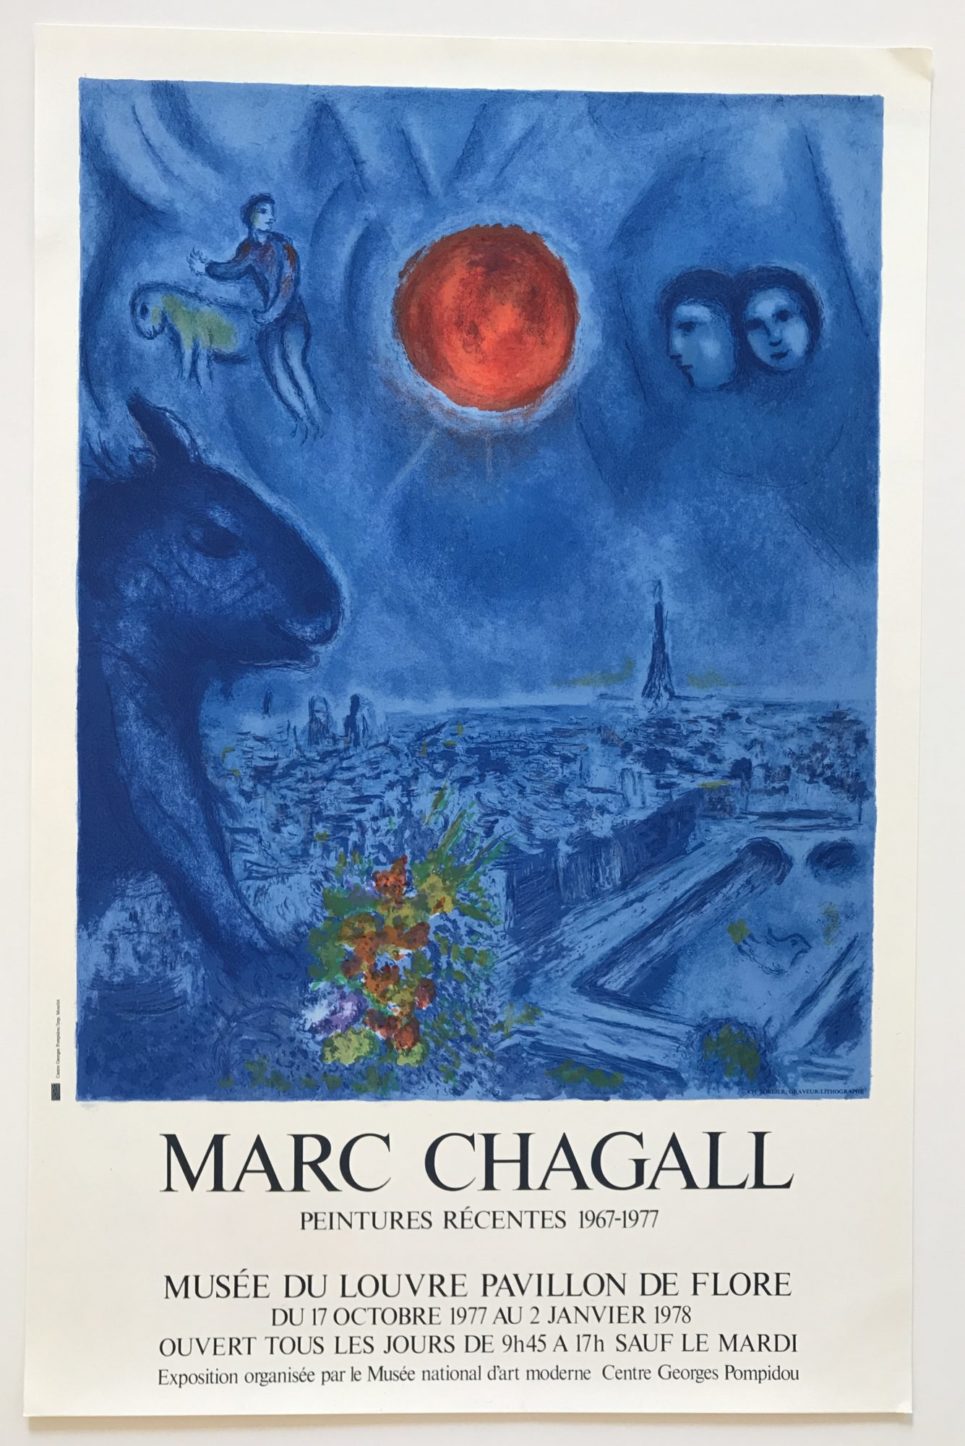 marc-chagall-peintures-recentes-1967-1977-musee-du-louvre-full-paper